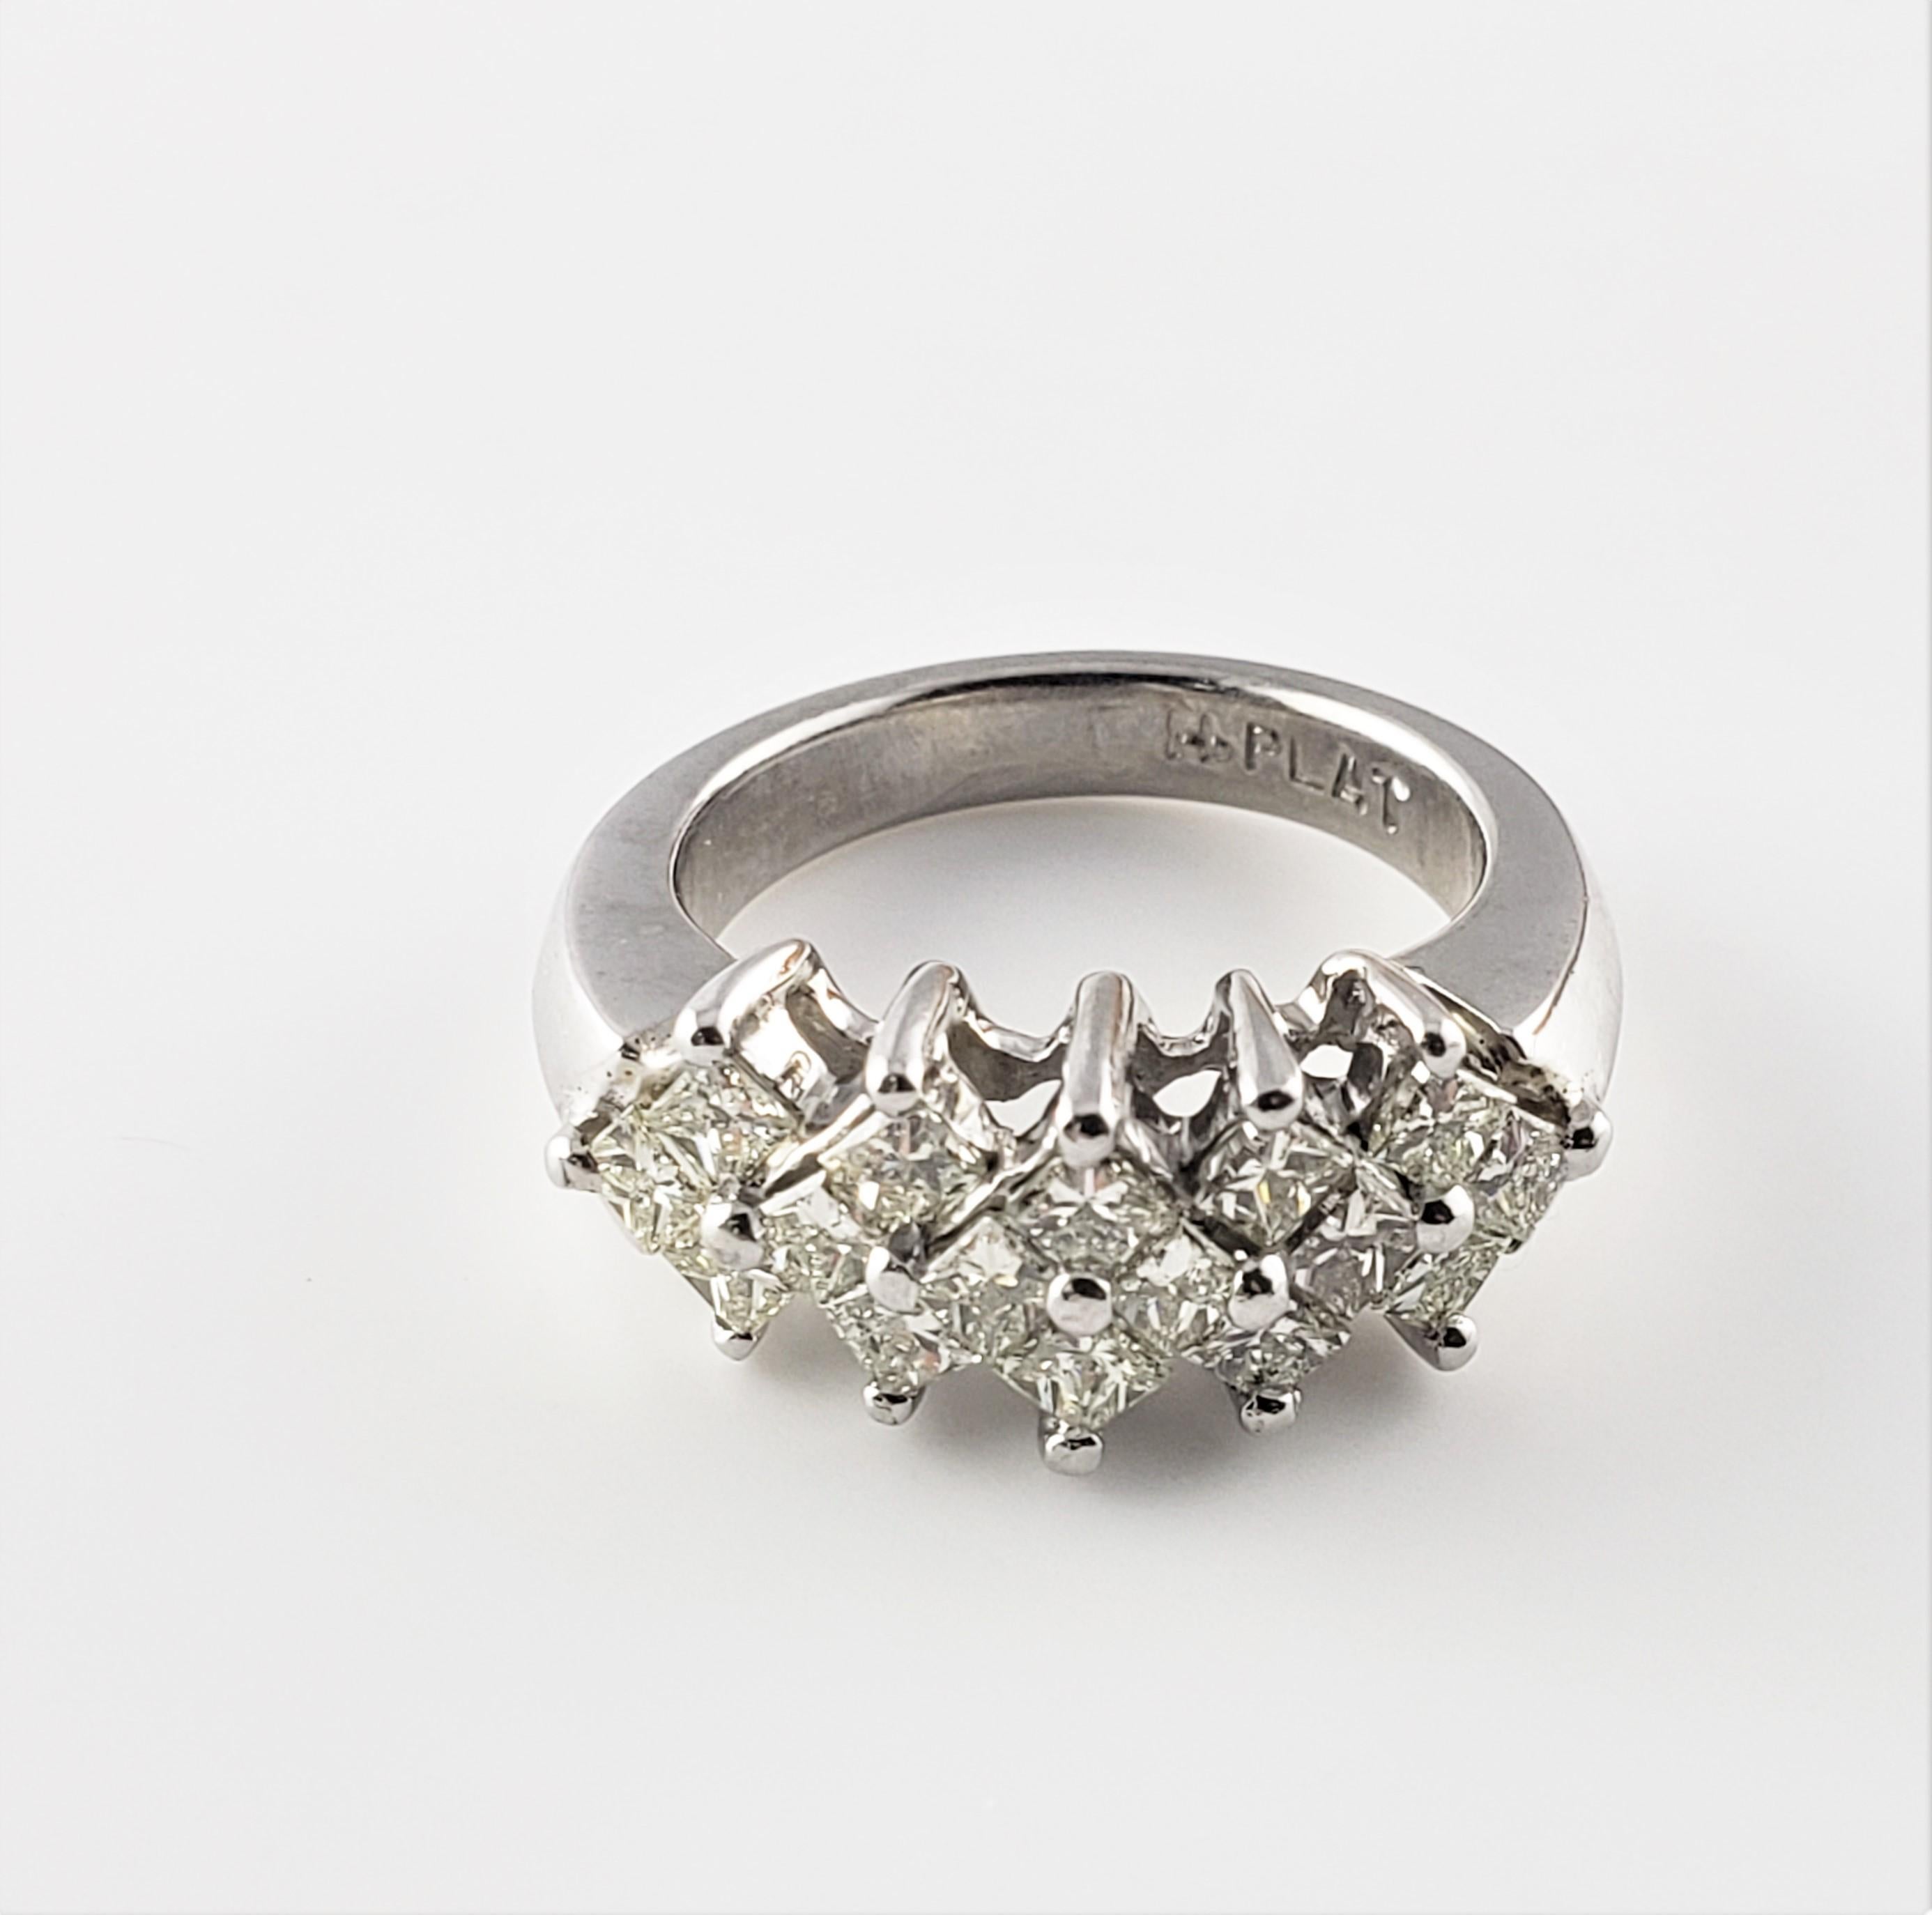 Platinum and Diamond Ring Size 5.5-

This sparkling ring features 16 princess cut diamonds set in platinum.  Width:  8 mm.  Shank: 3.5 mm.

Approximate total diamond weight:  1.28 ct.

Diamond color:  K-M

Diamond clarity:  SI1-VS2

Ring Size: